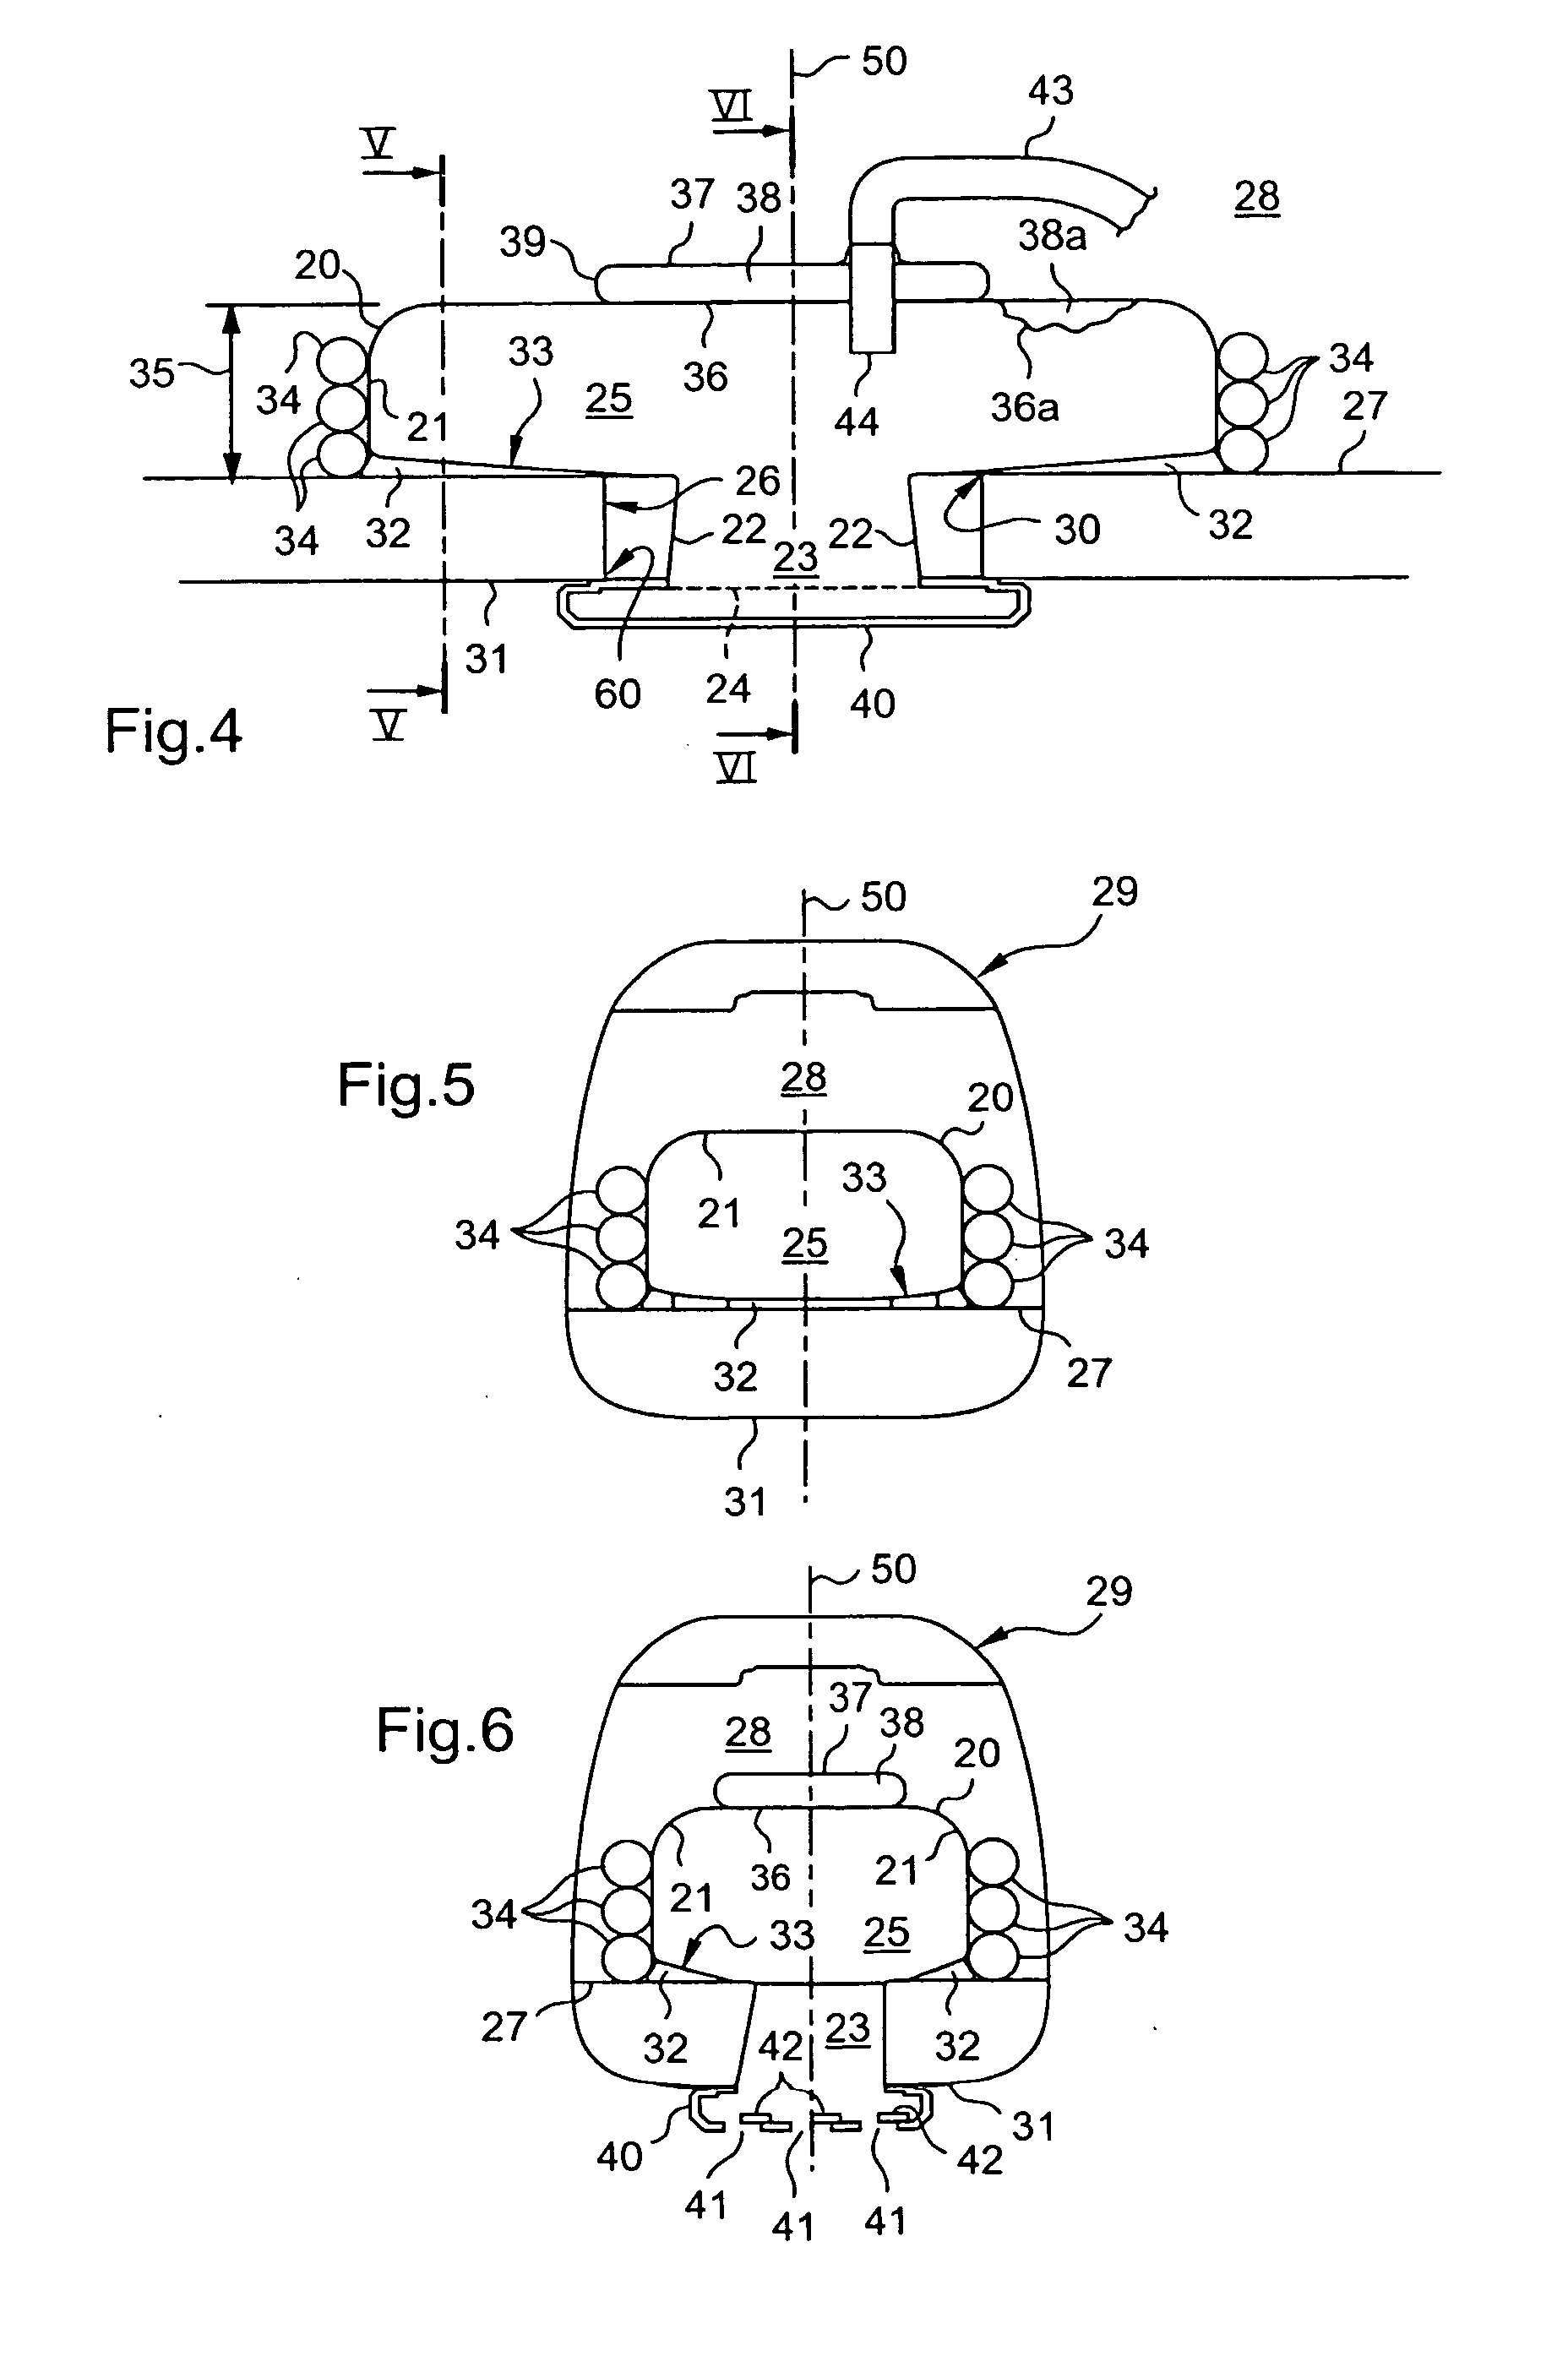 Aerially transportable tank for storing a composition for discharging in flight